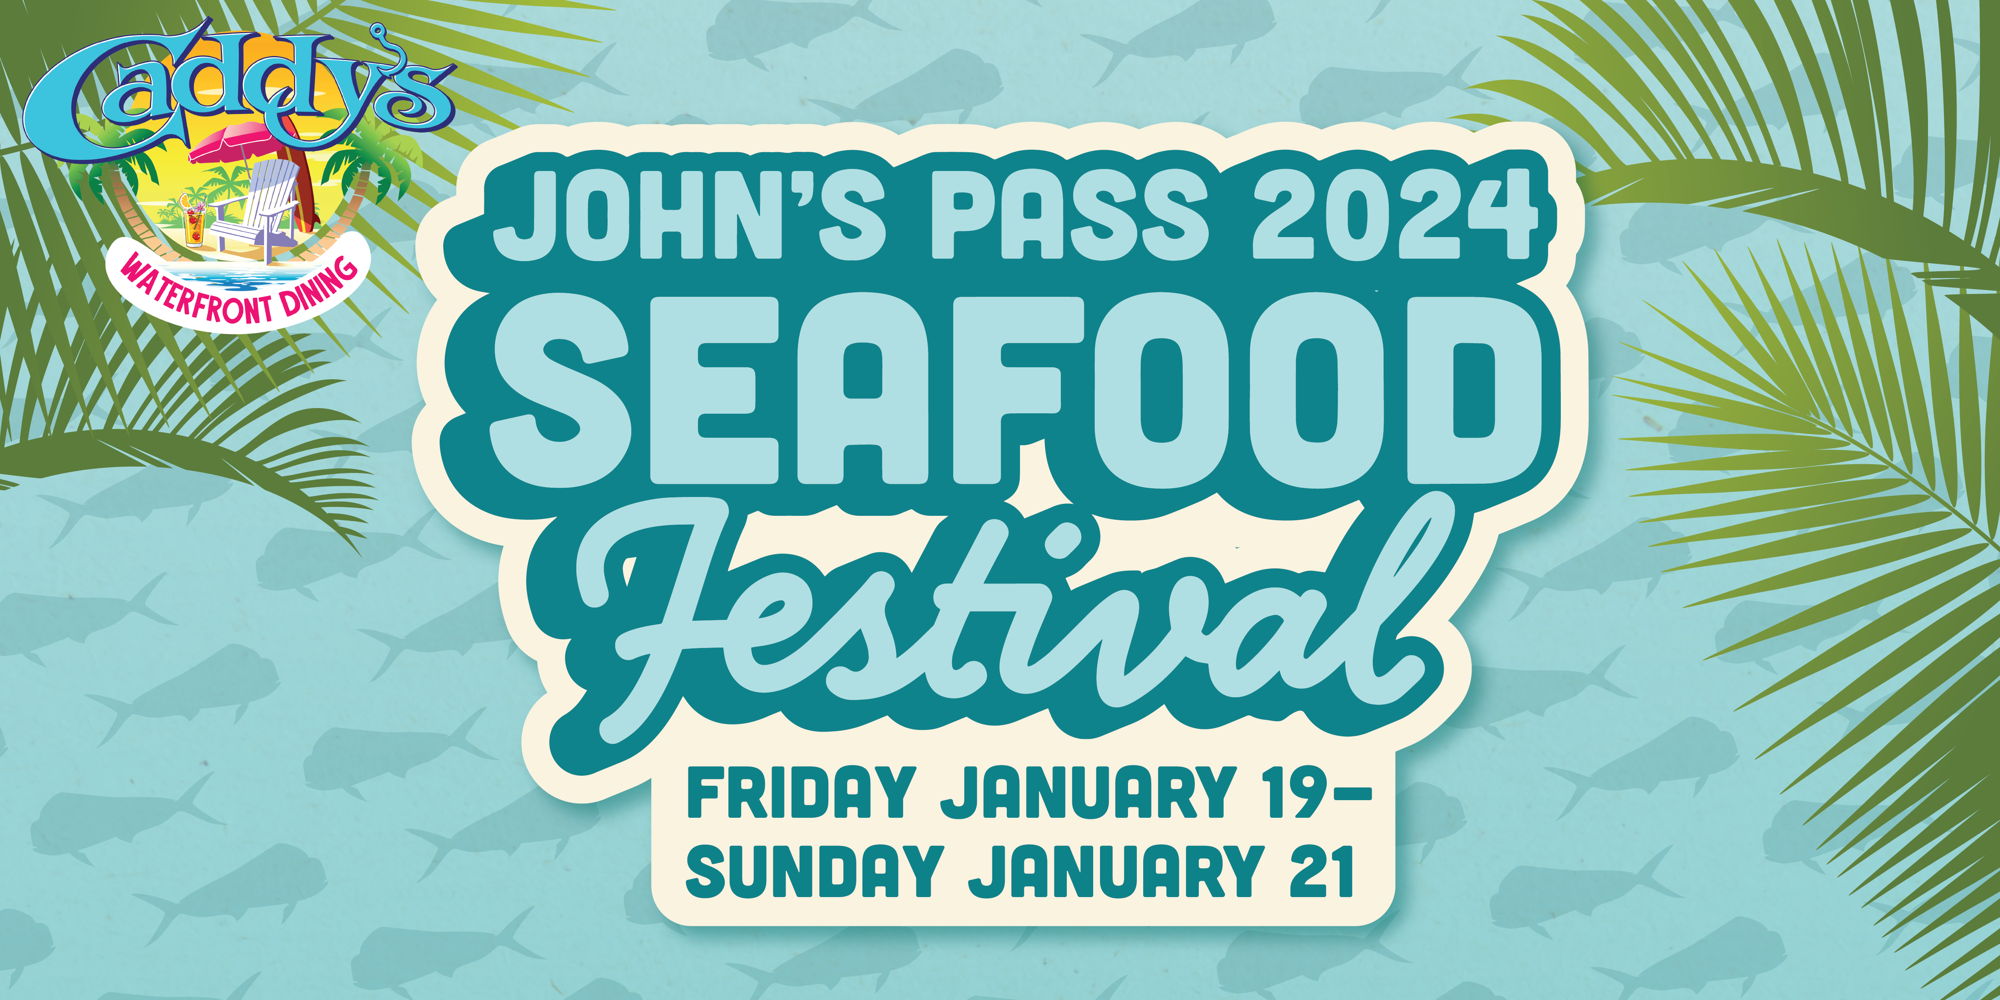 John’s Pass 2024 Seafood Festival!  promotional image